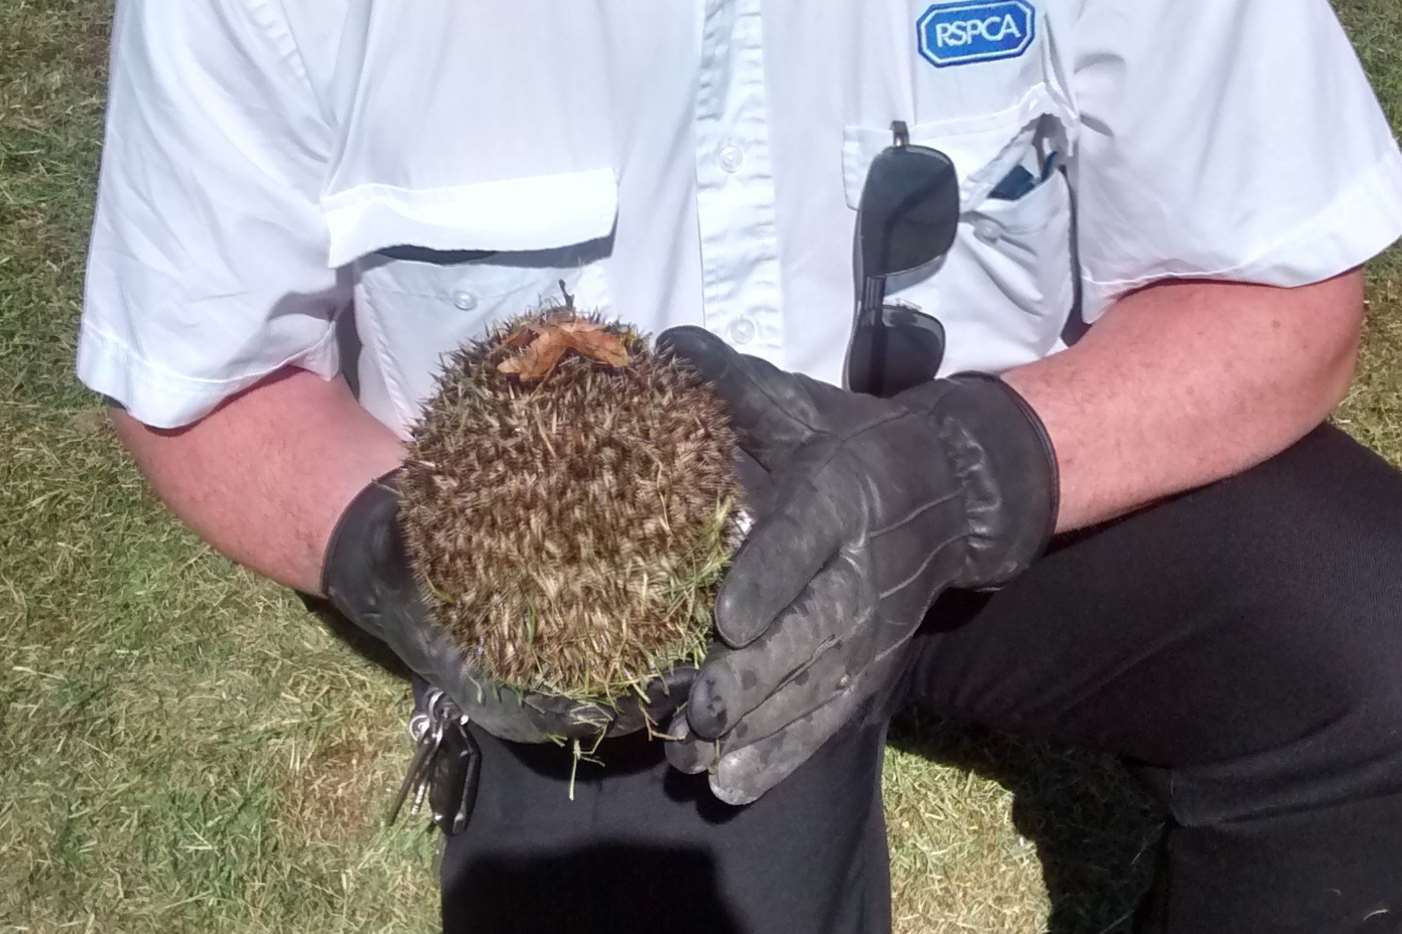 RSPCA collection officer Brian Milligan and the hedgehog.